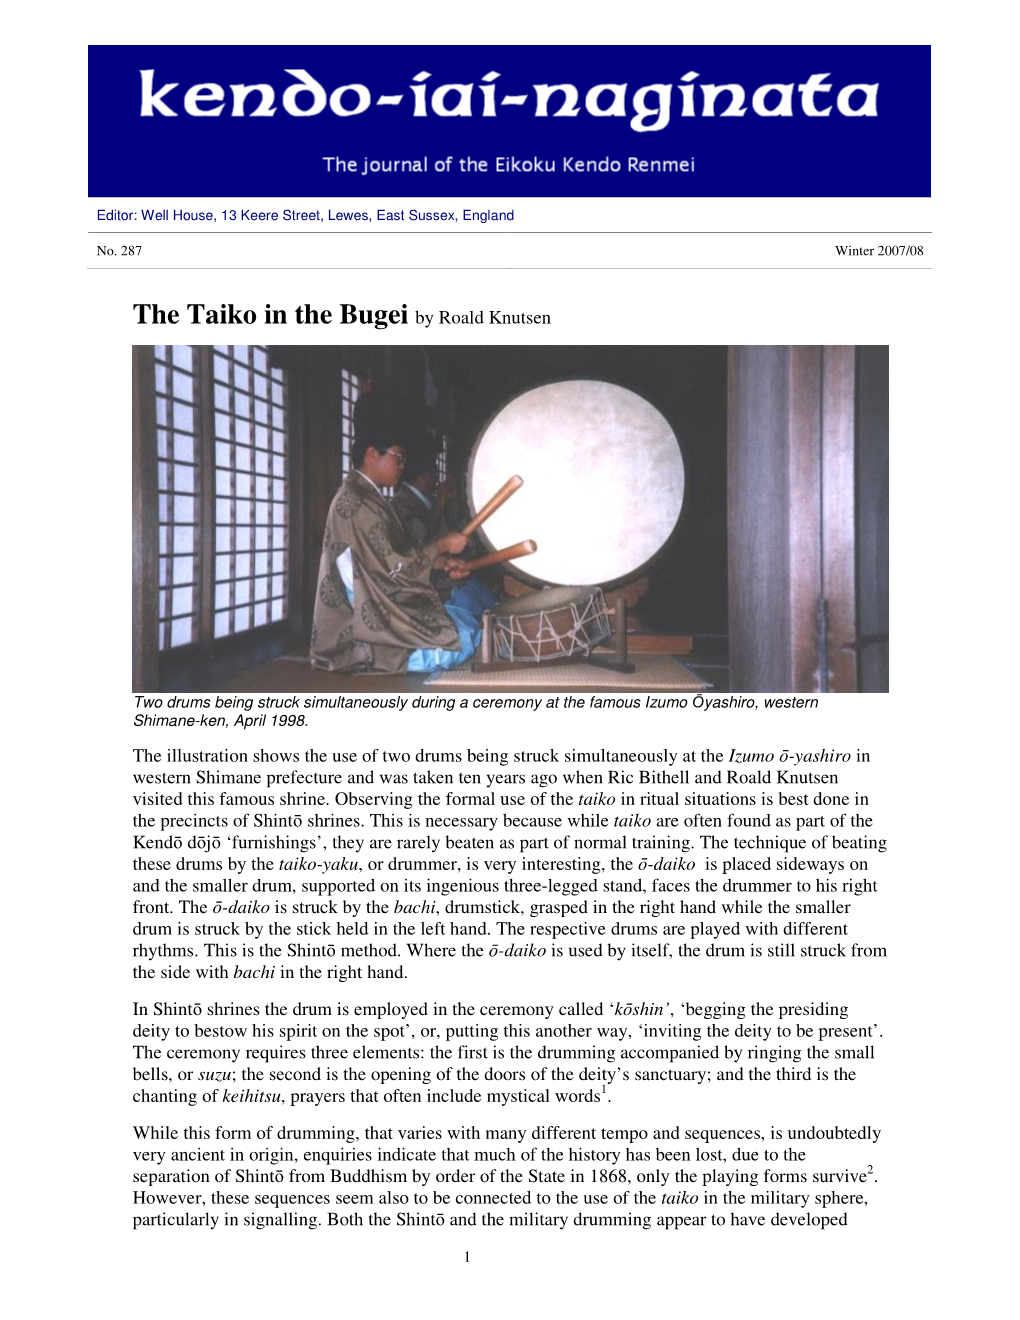 The Taiko in the Bugei by Roald Knutsen